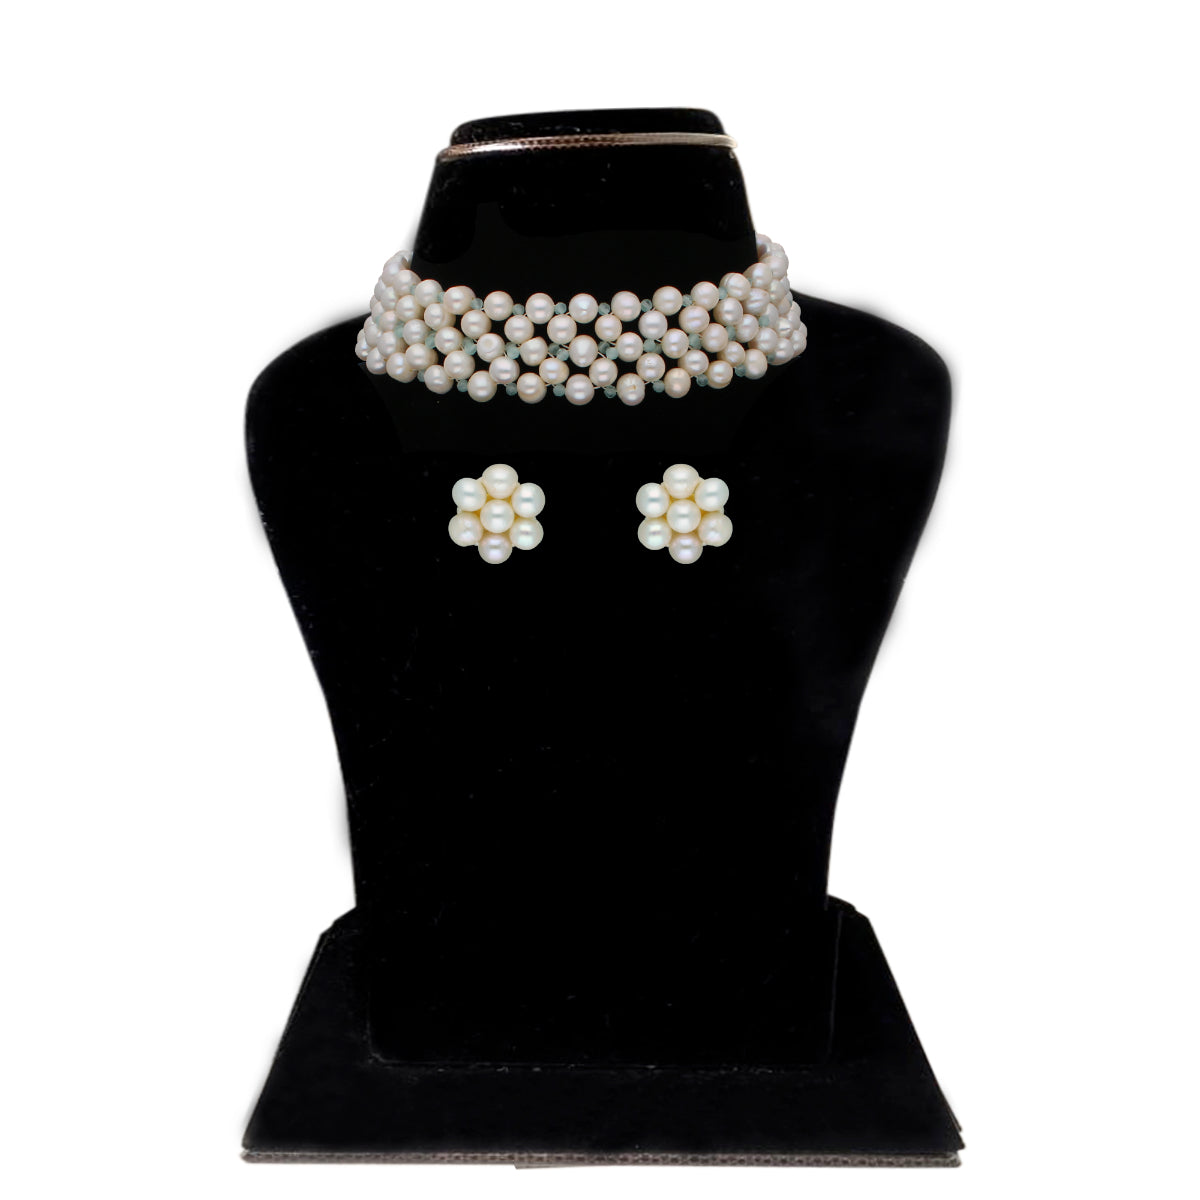 Black Wedding Chokers Online Shopping for Women at Low Prices